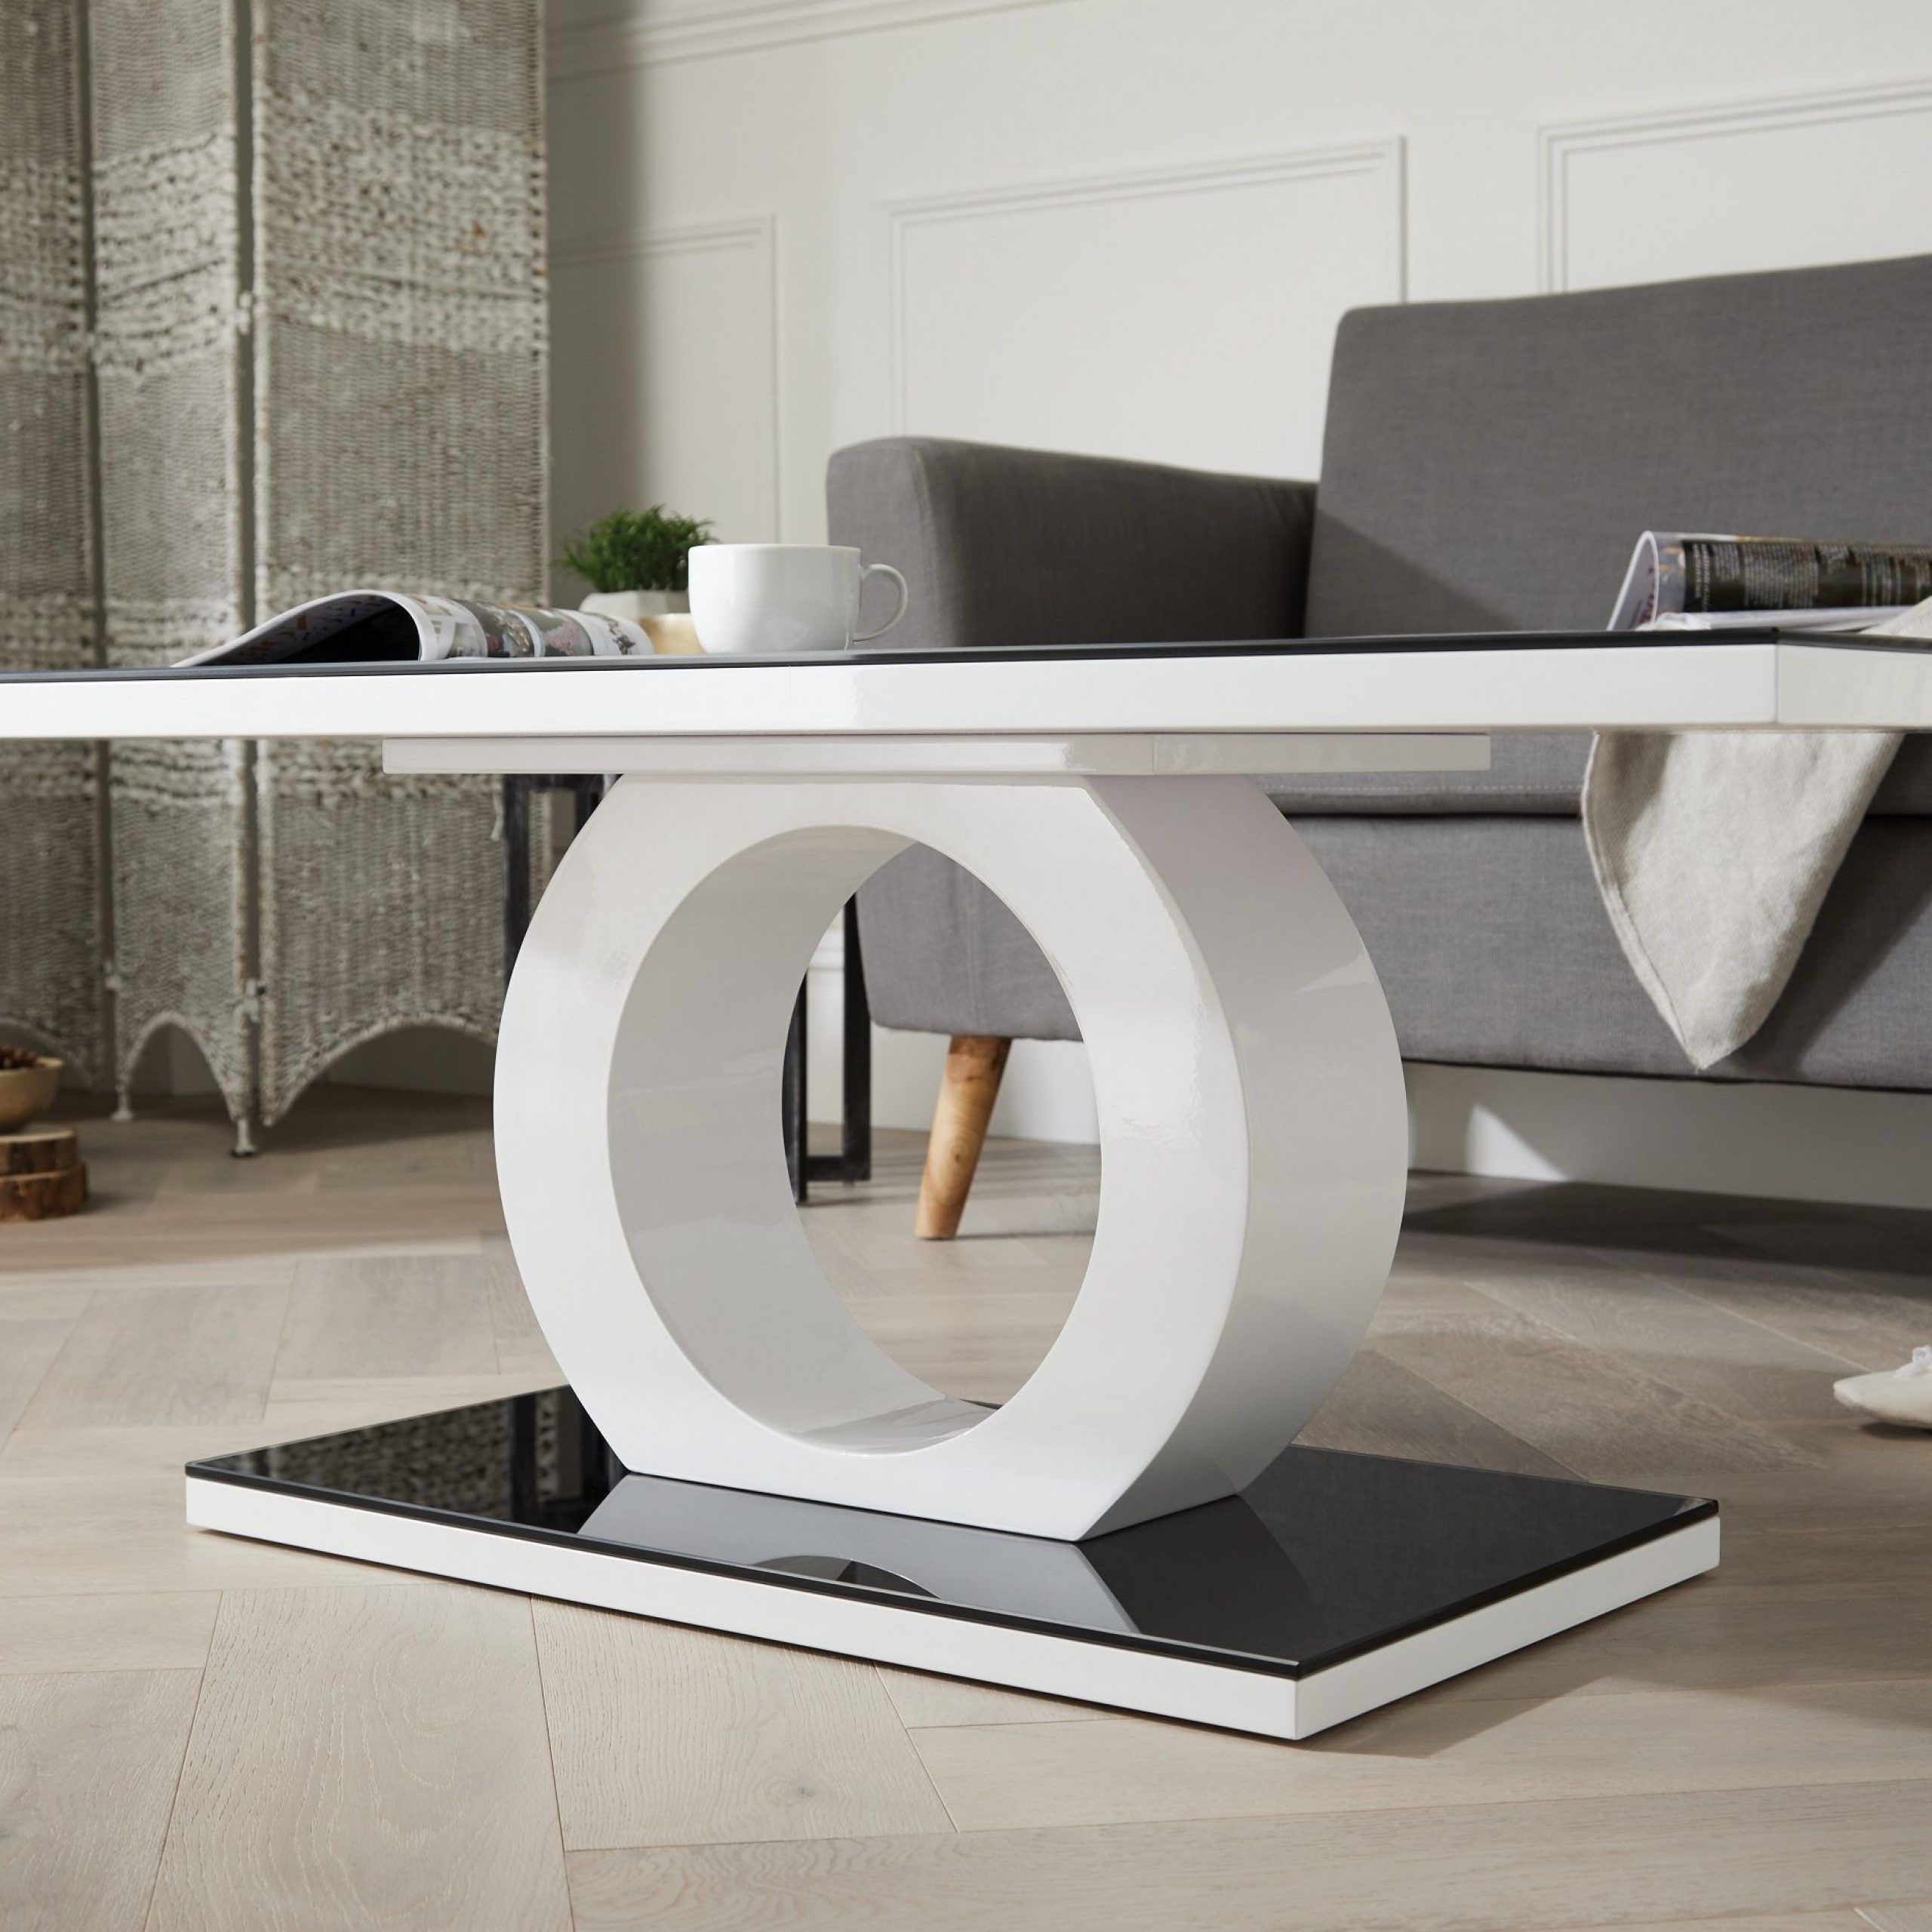 Widely Used Black And White Coffee Tables Intended For Giovani White High Gloss Coffee Table (View 13 of 20)